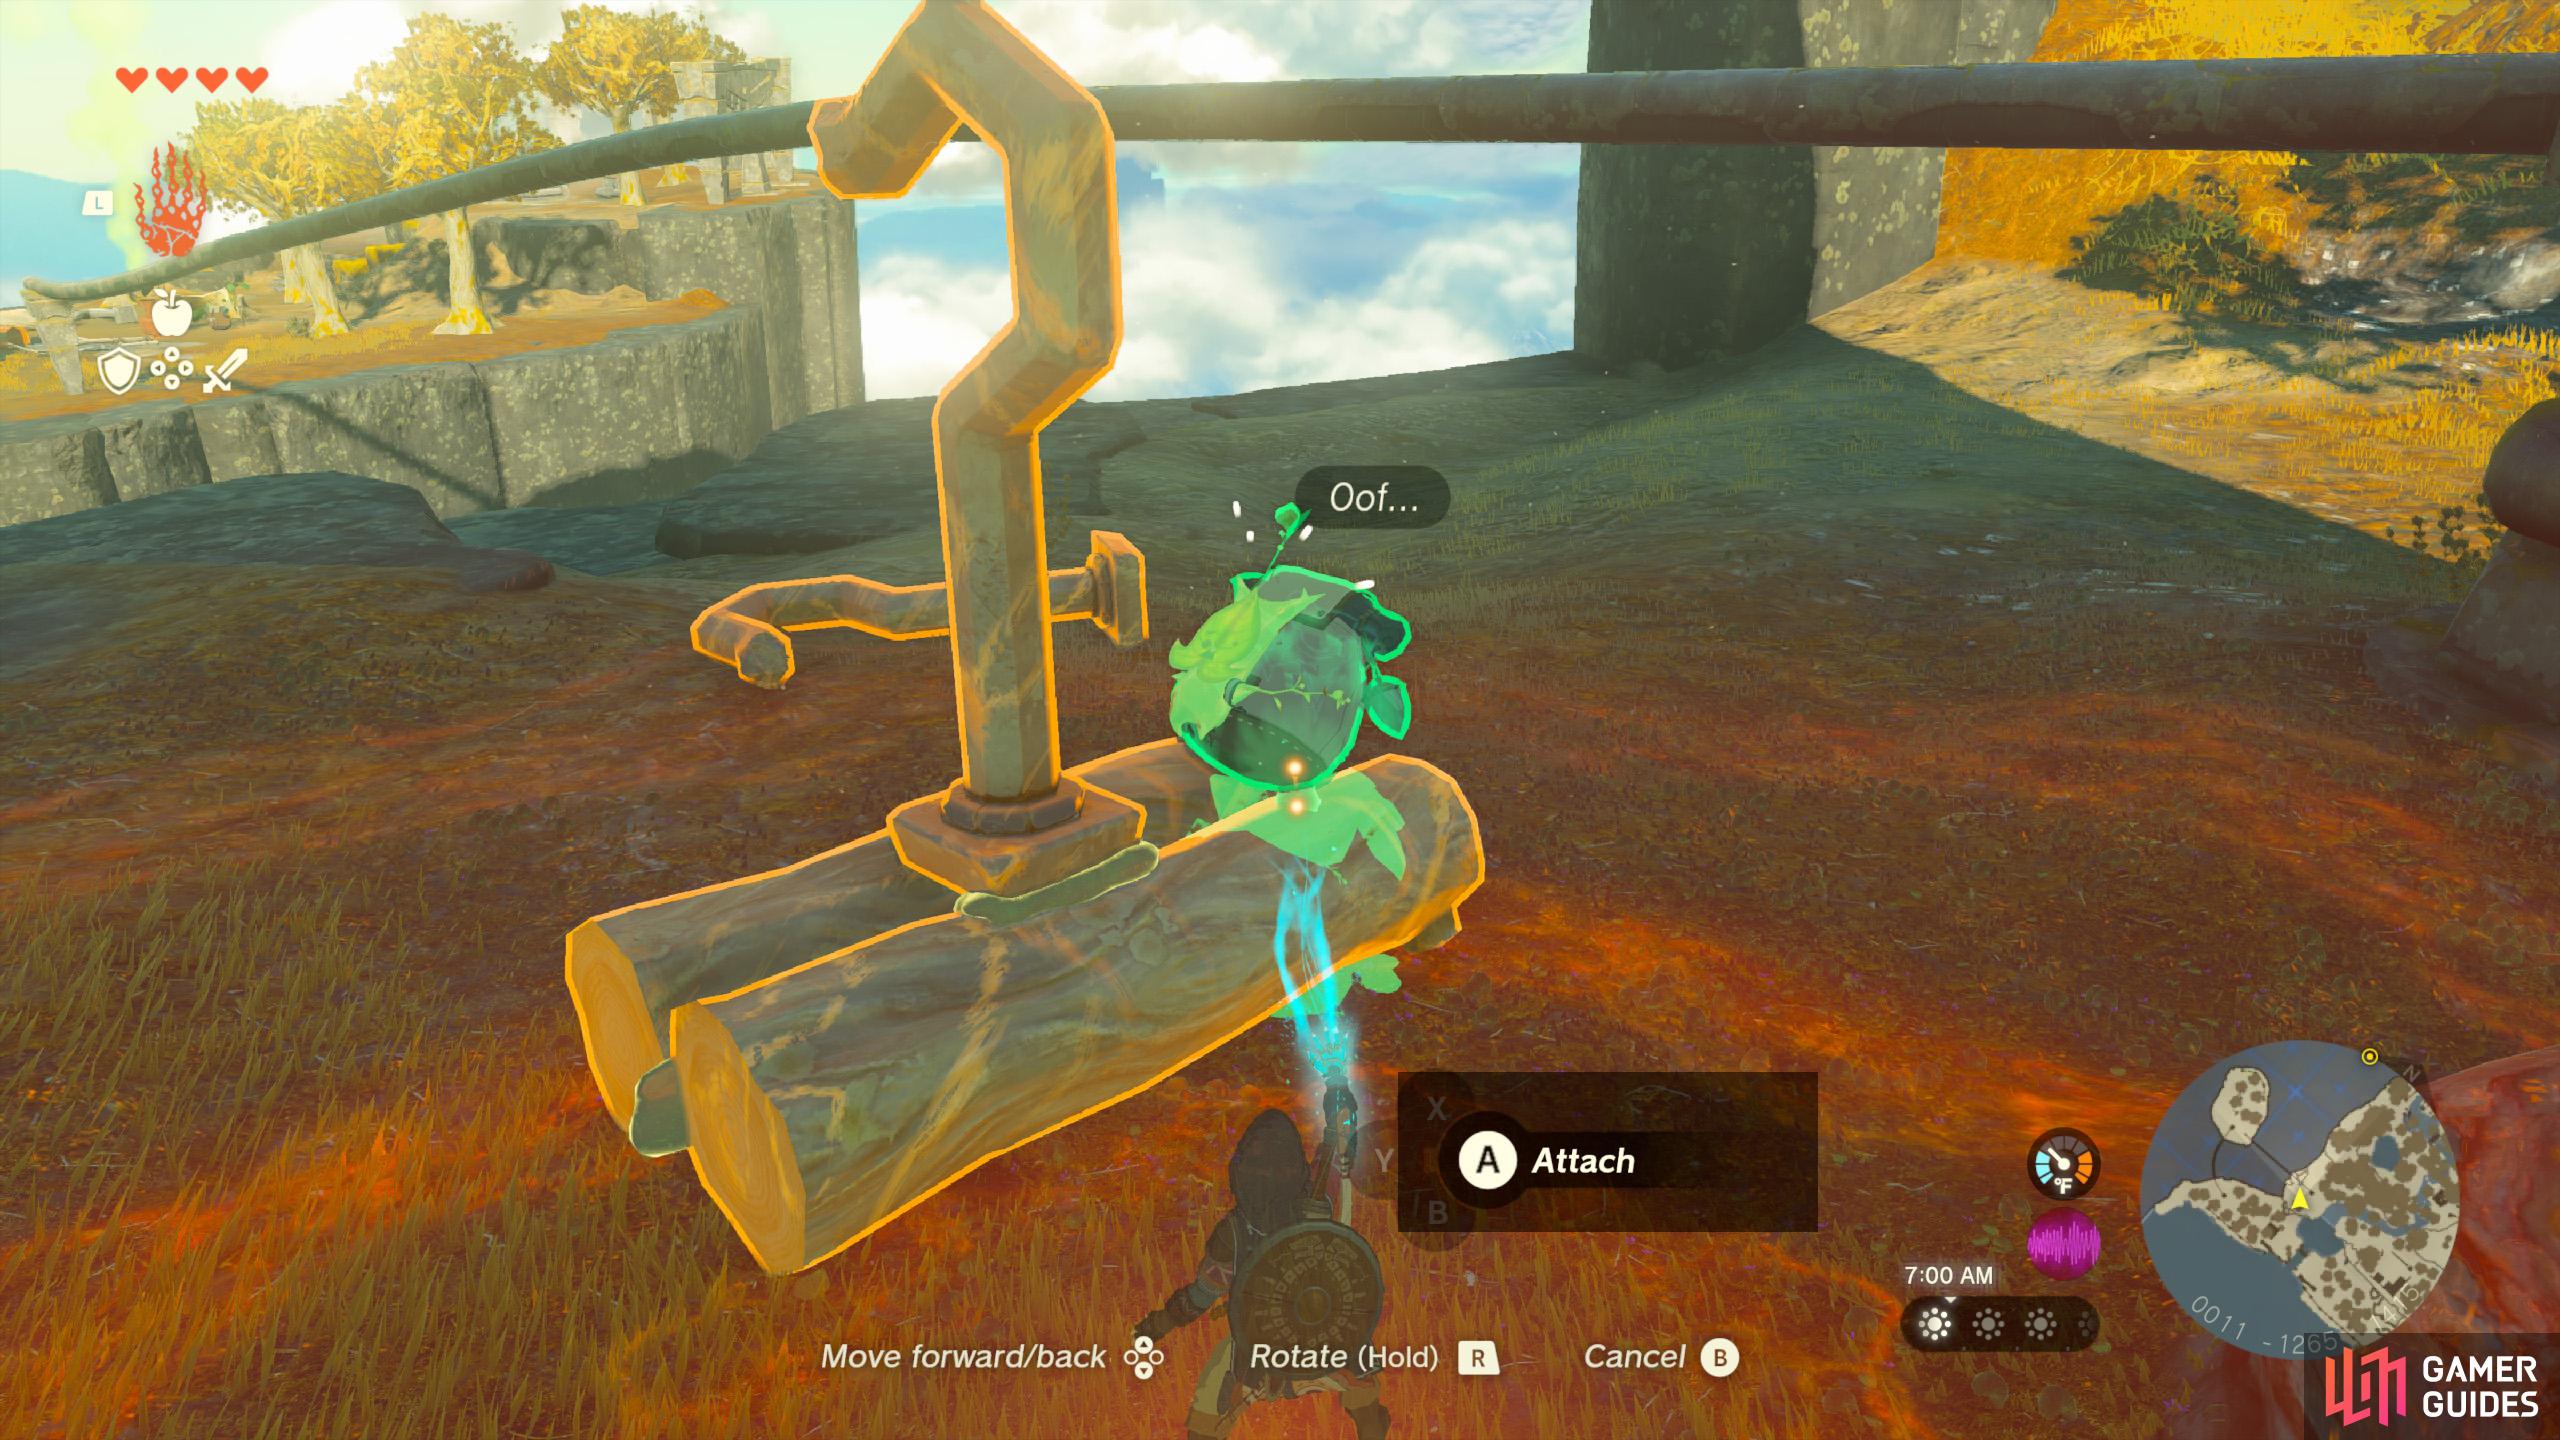 Build a platform and attach the Korok to it 